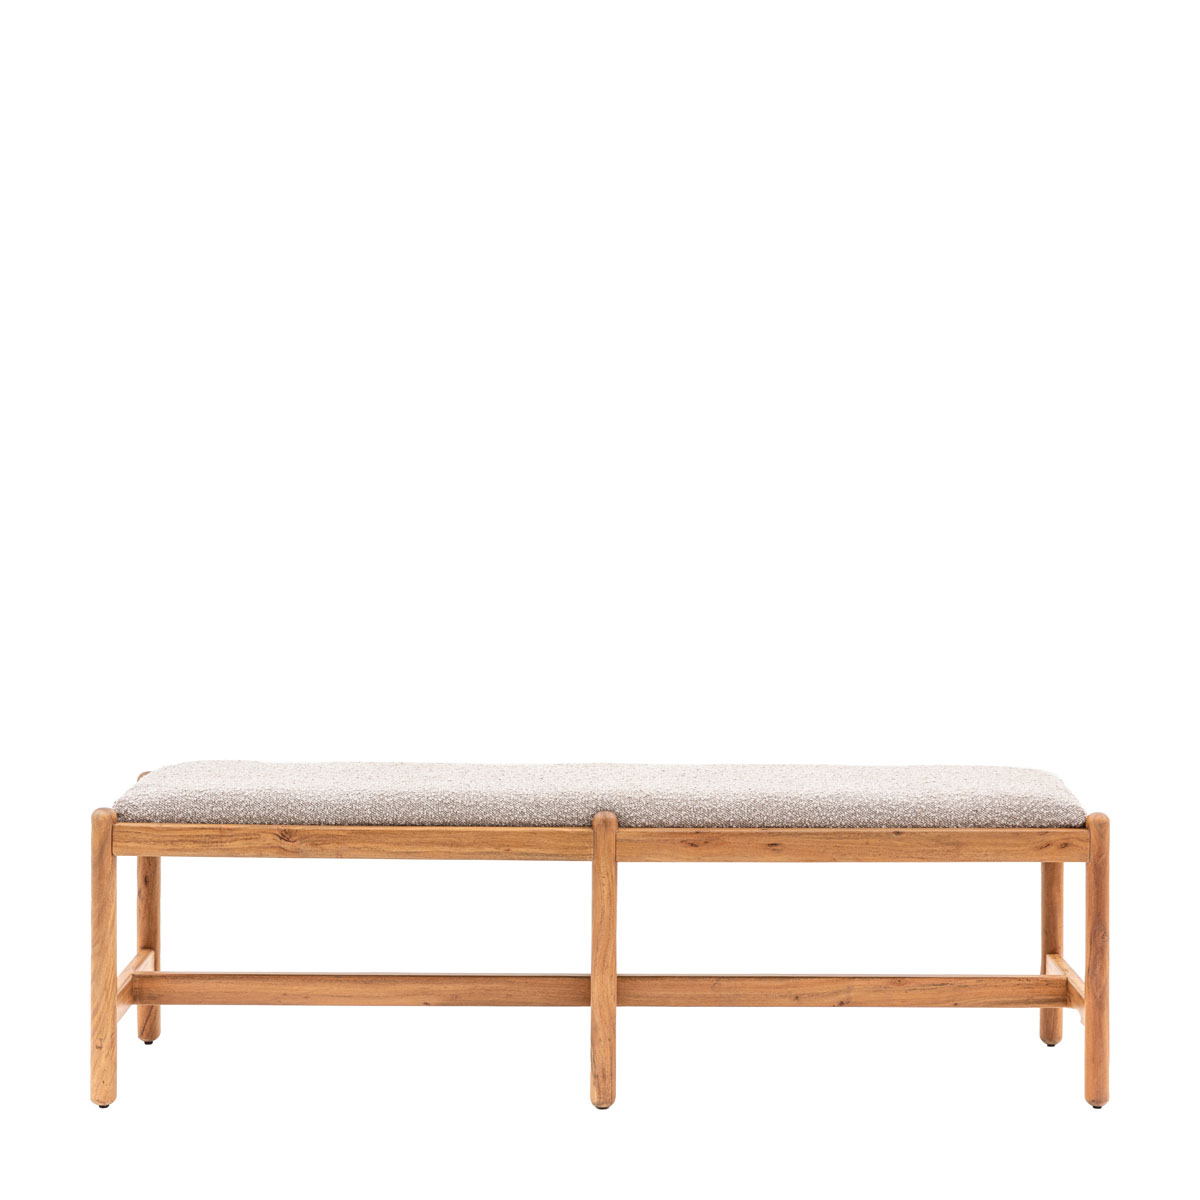 Cannes Dining Bench 1600x400x460mm